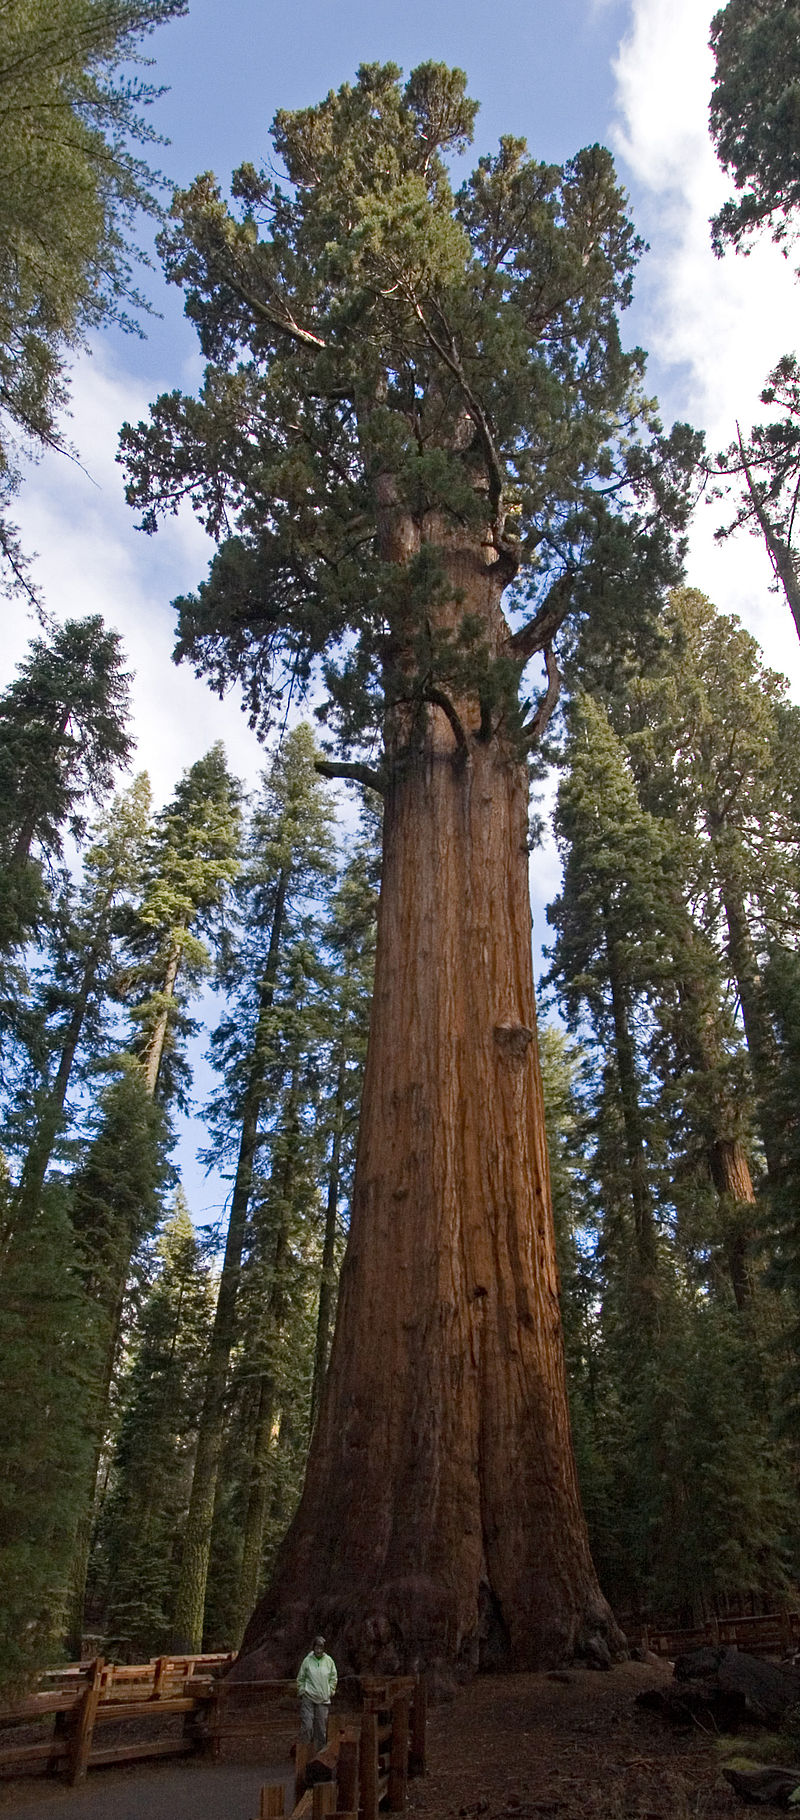 General Sherman Tree in Sequoia National Park, among the biggest in the world, still safe amid growing wildfire